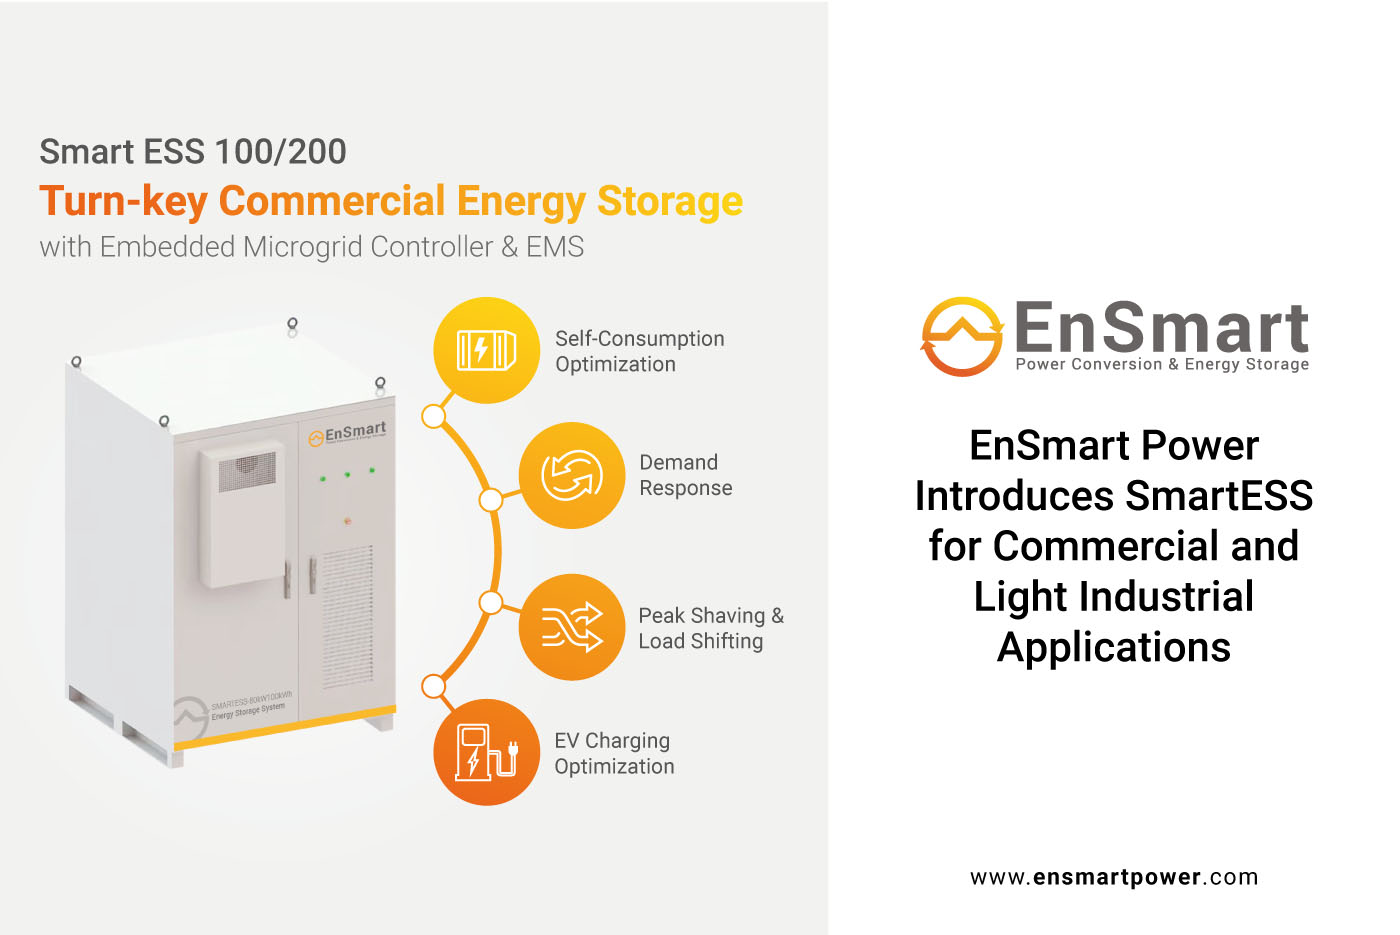 EnSmart Power Introduces SmartESS for Commercial and Light Industrial Applications